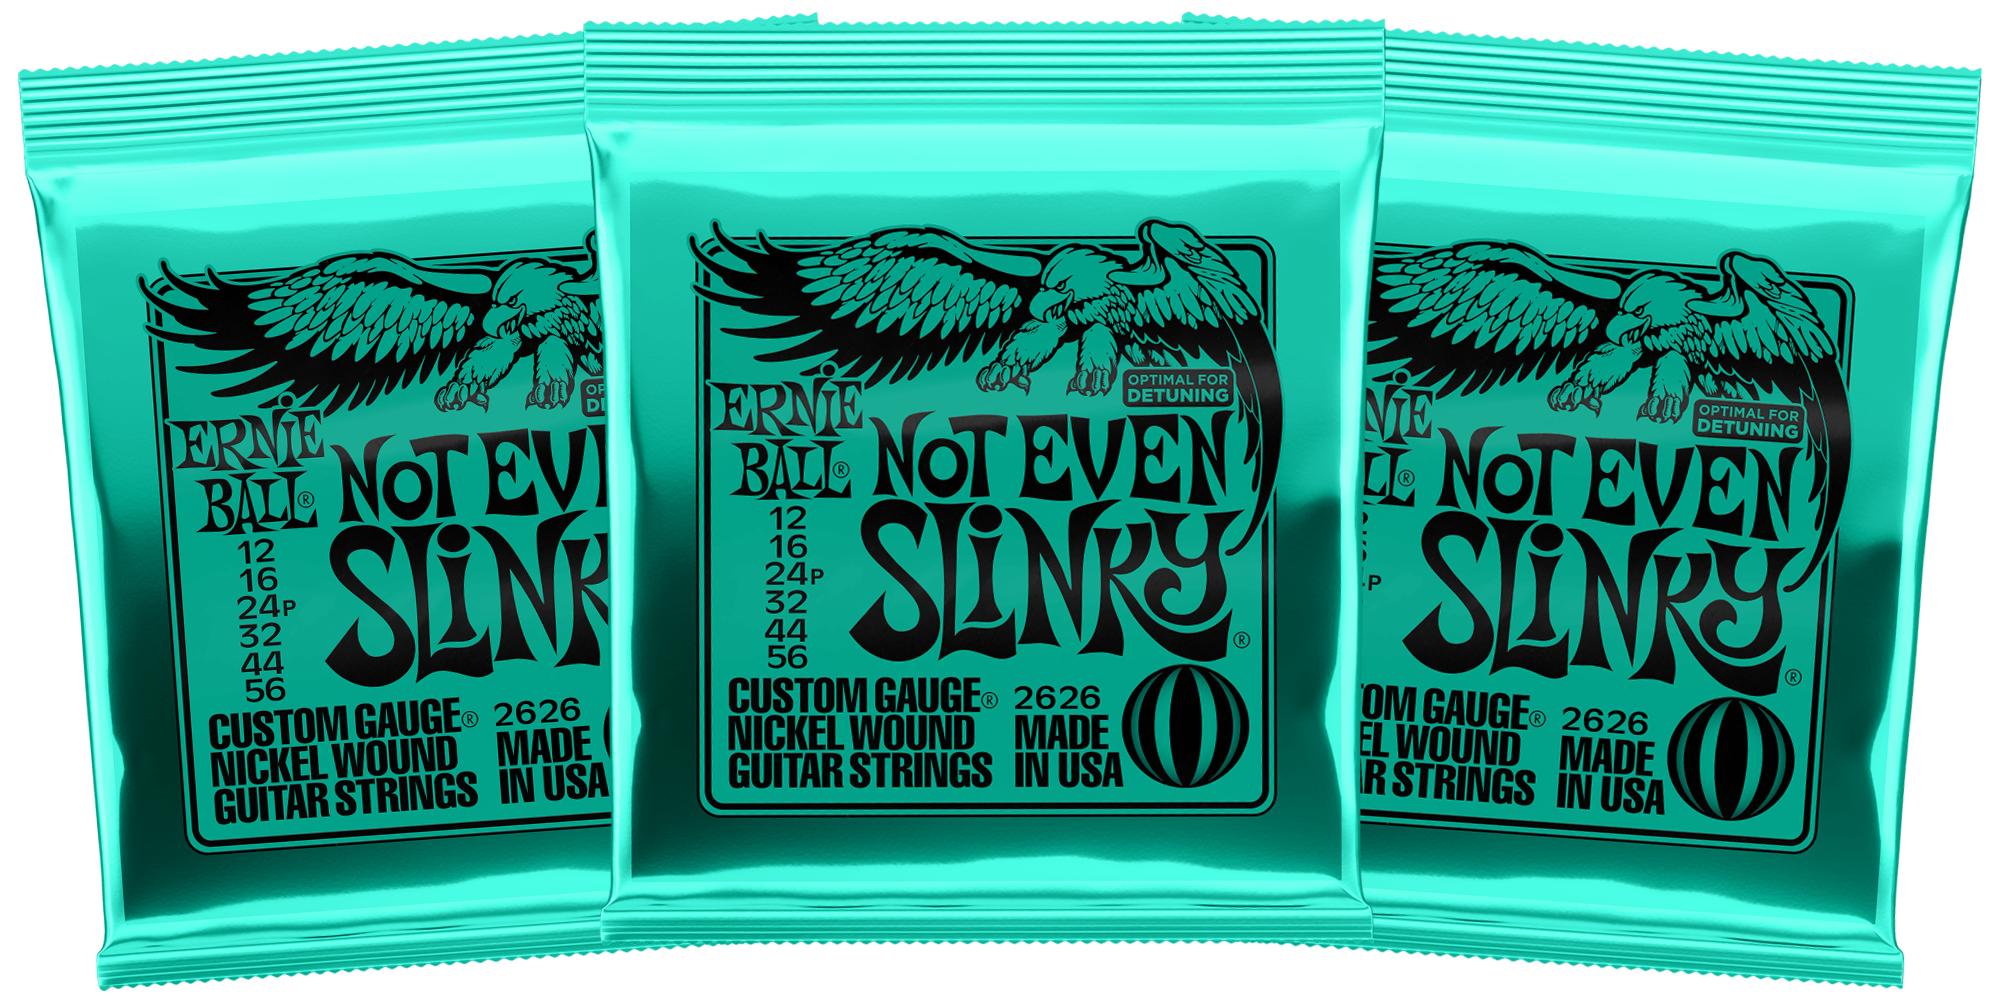 Authentic Ernie Ball Slinky Not Even Slinky 6-String Electric Guitar String Set